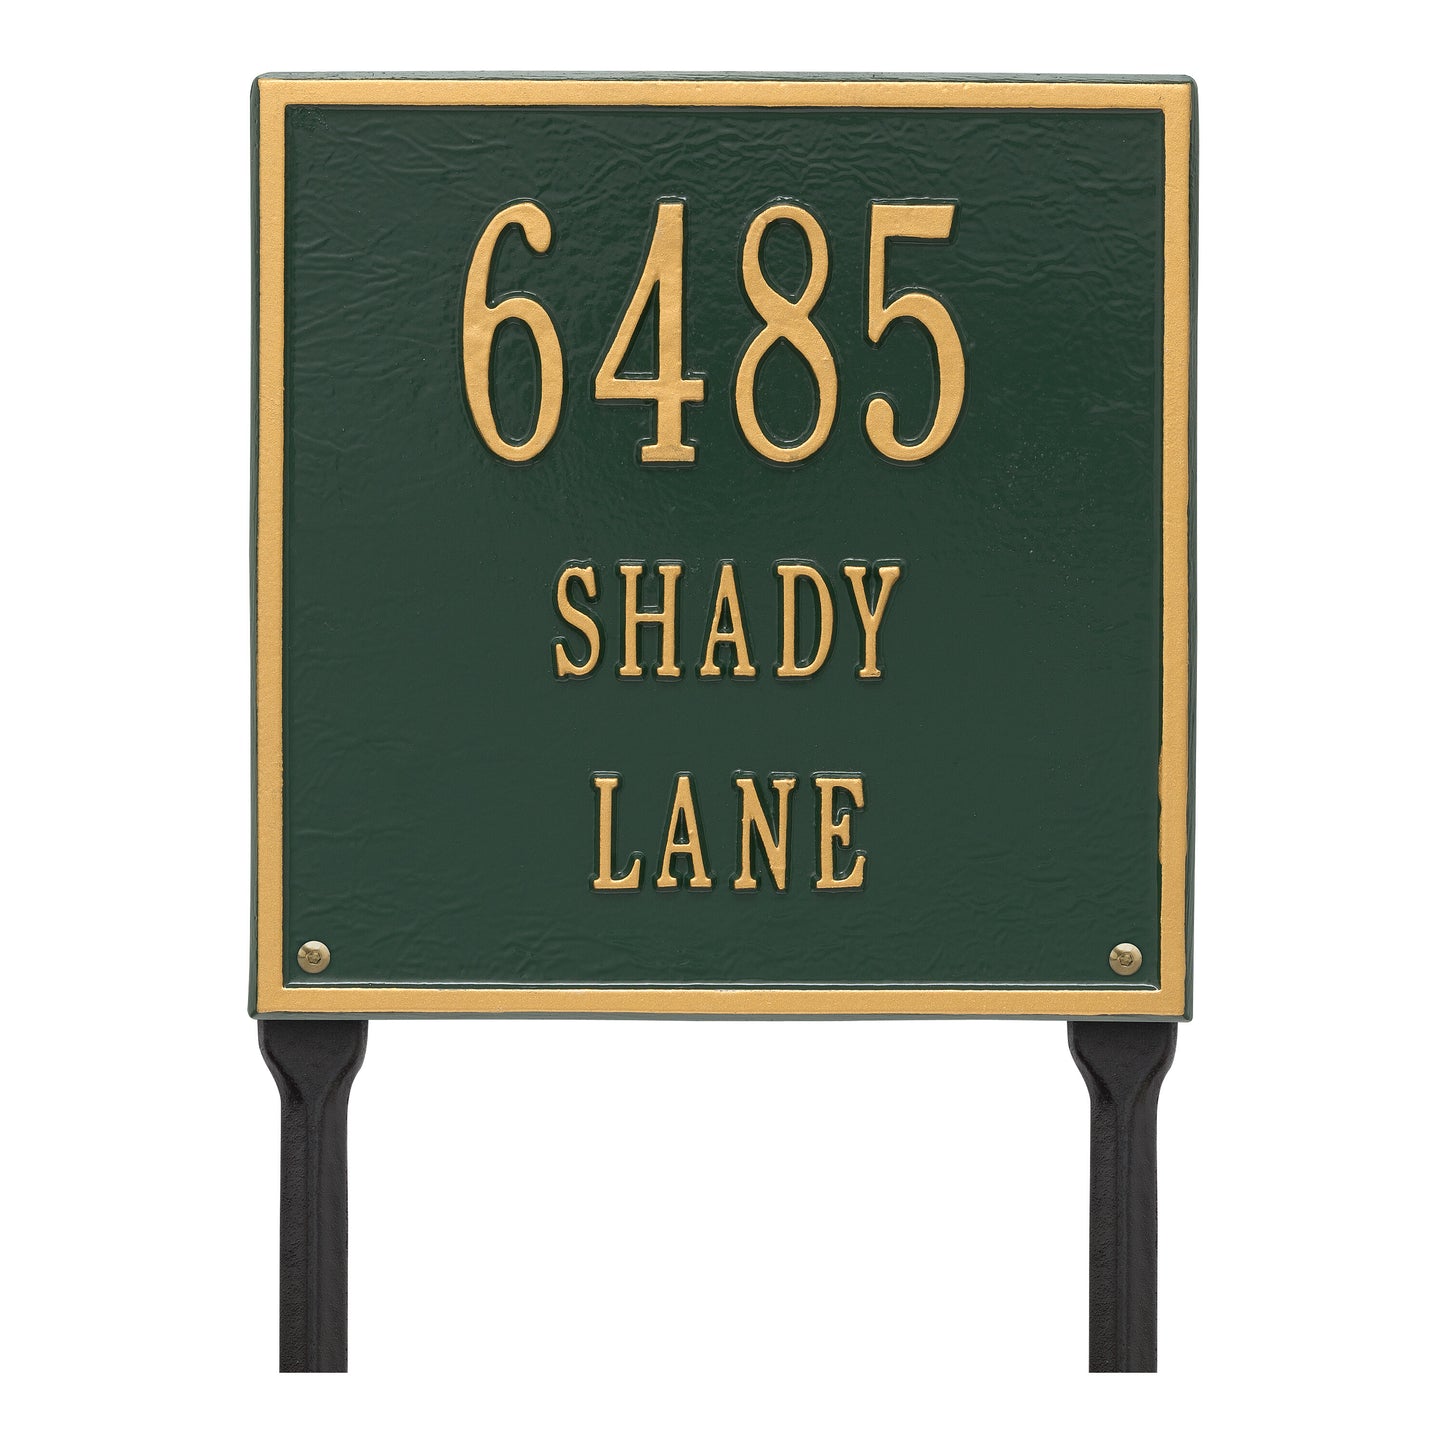 Whitehall Products Personalized Square Standard Lawn Plaque Three Line Oil Rubbed Bronze